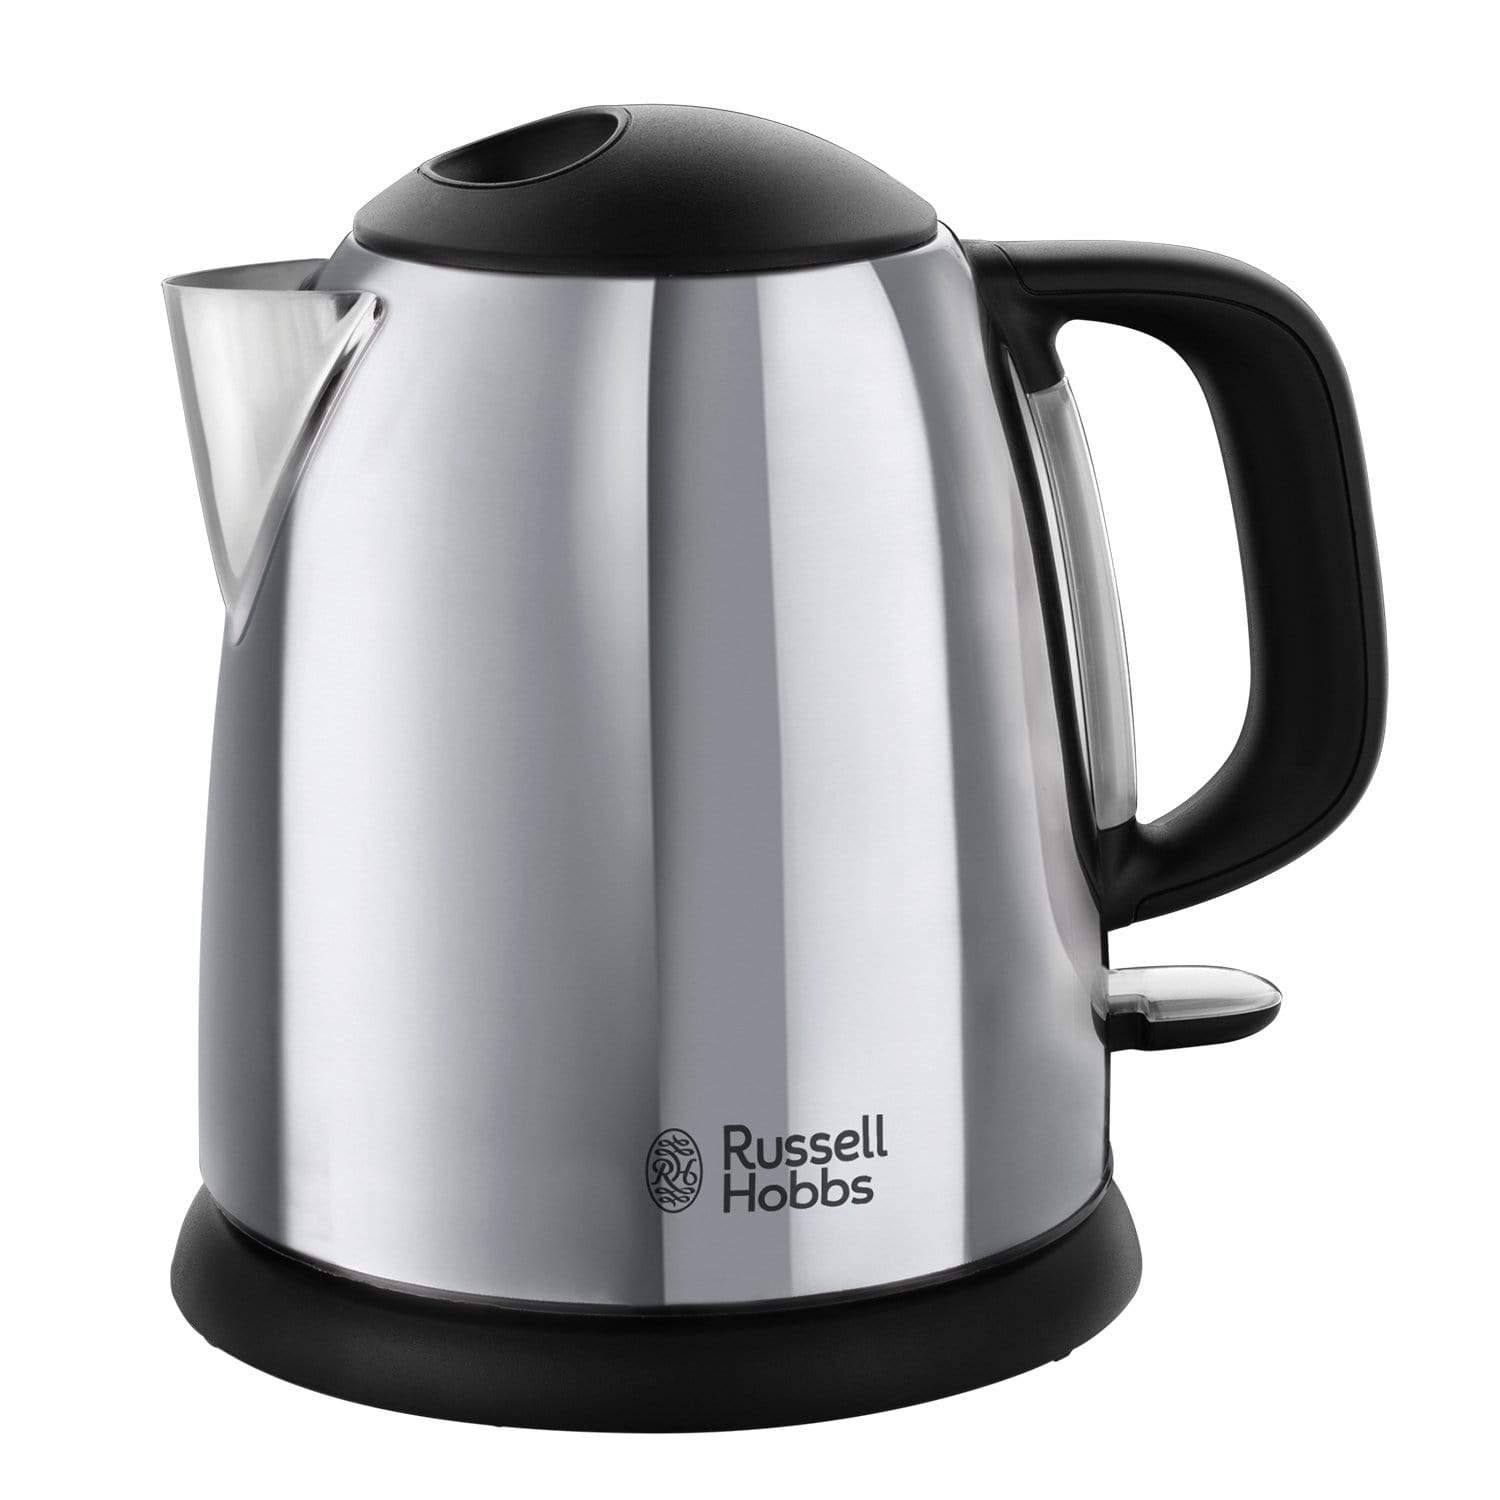 Russell Hobbs Classic Compact Cordless Kettle 1 Litre - 24990 